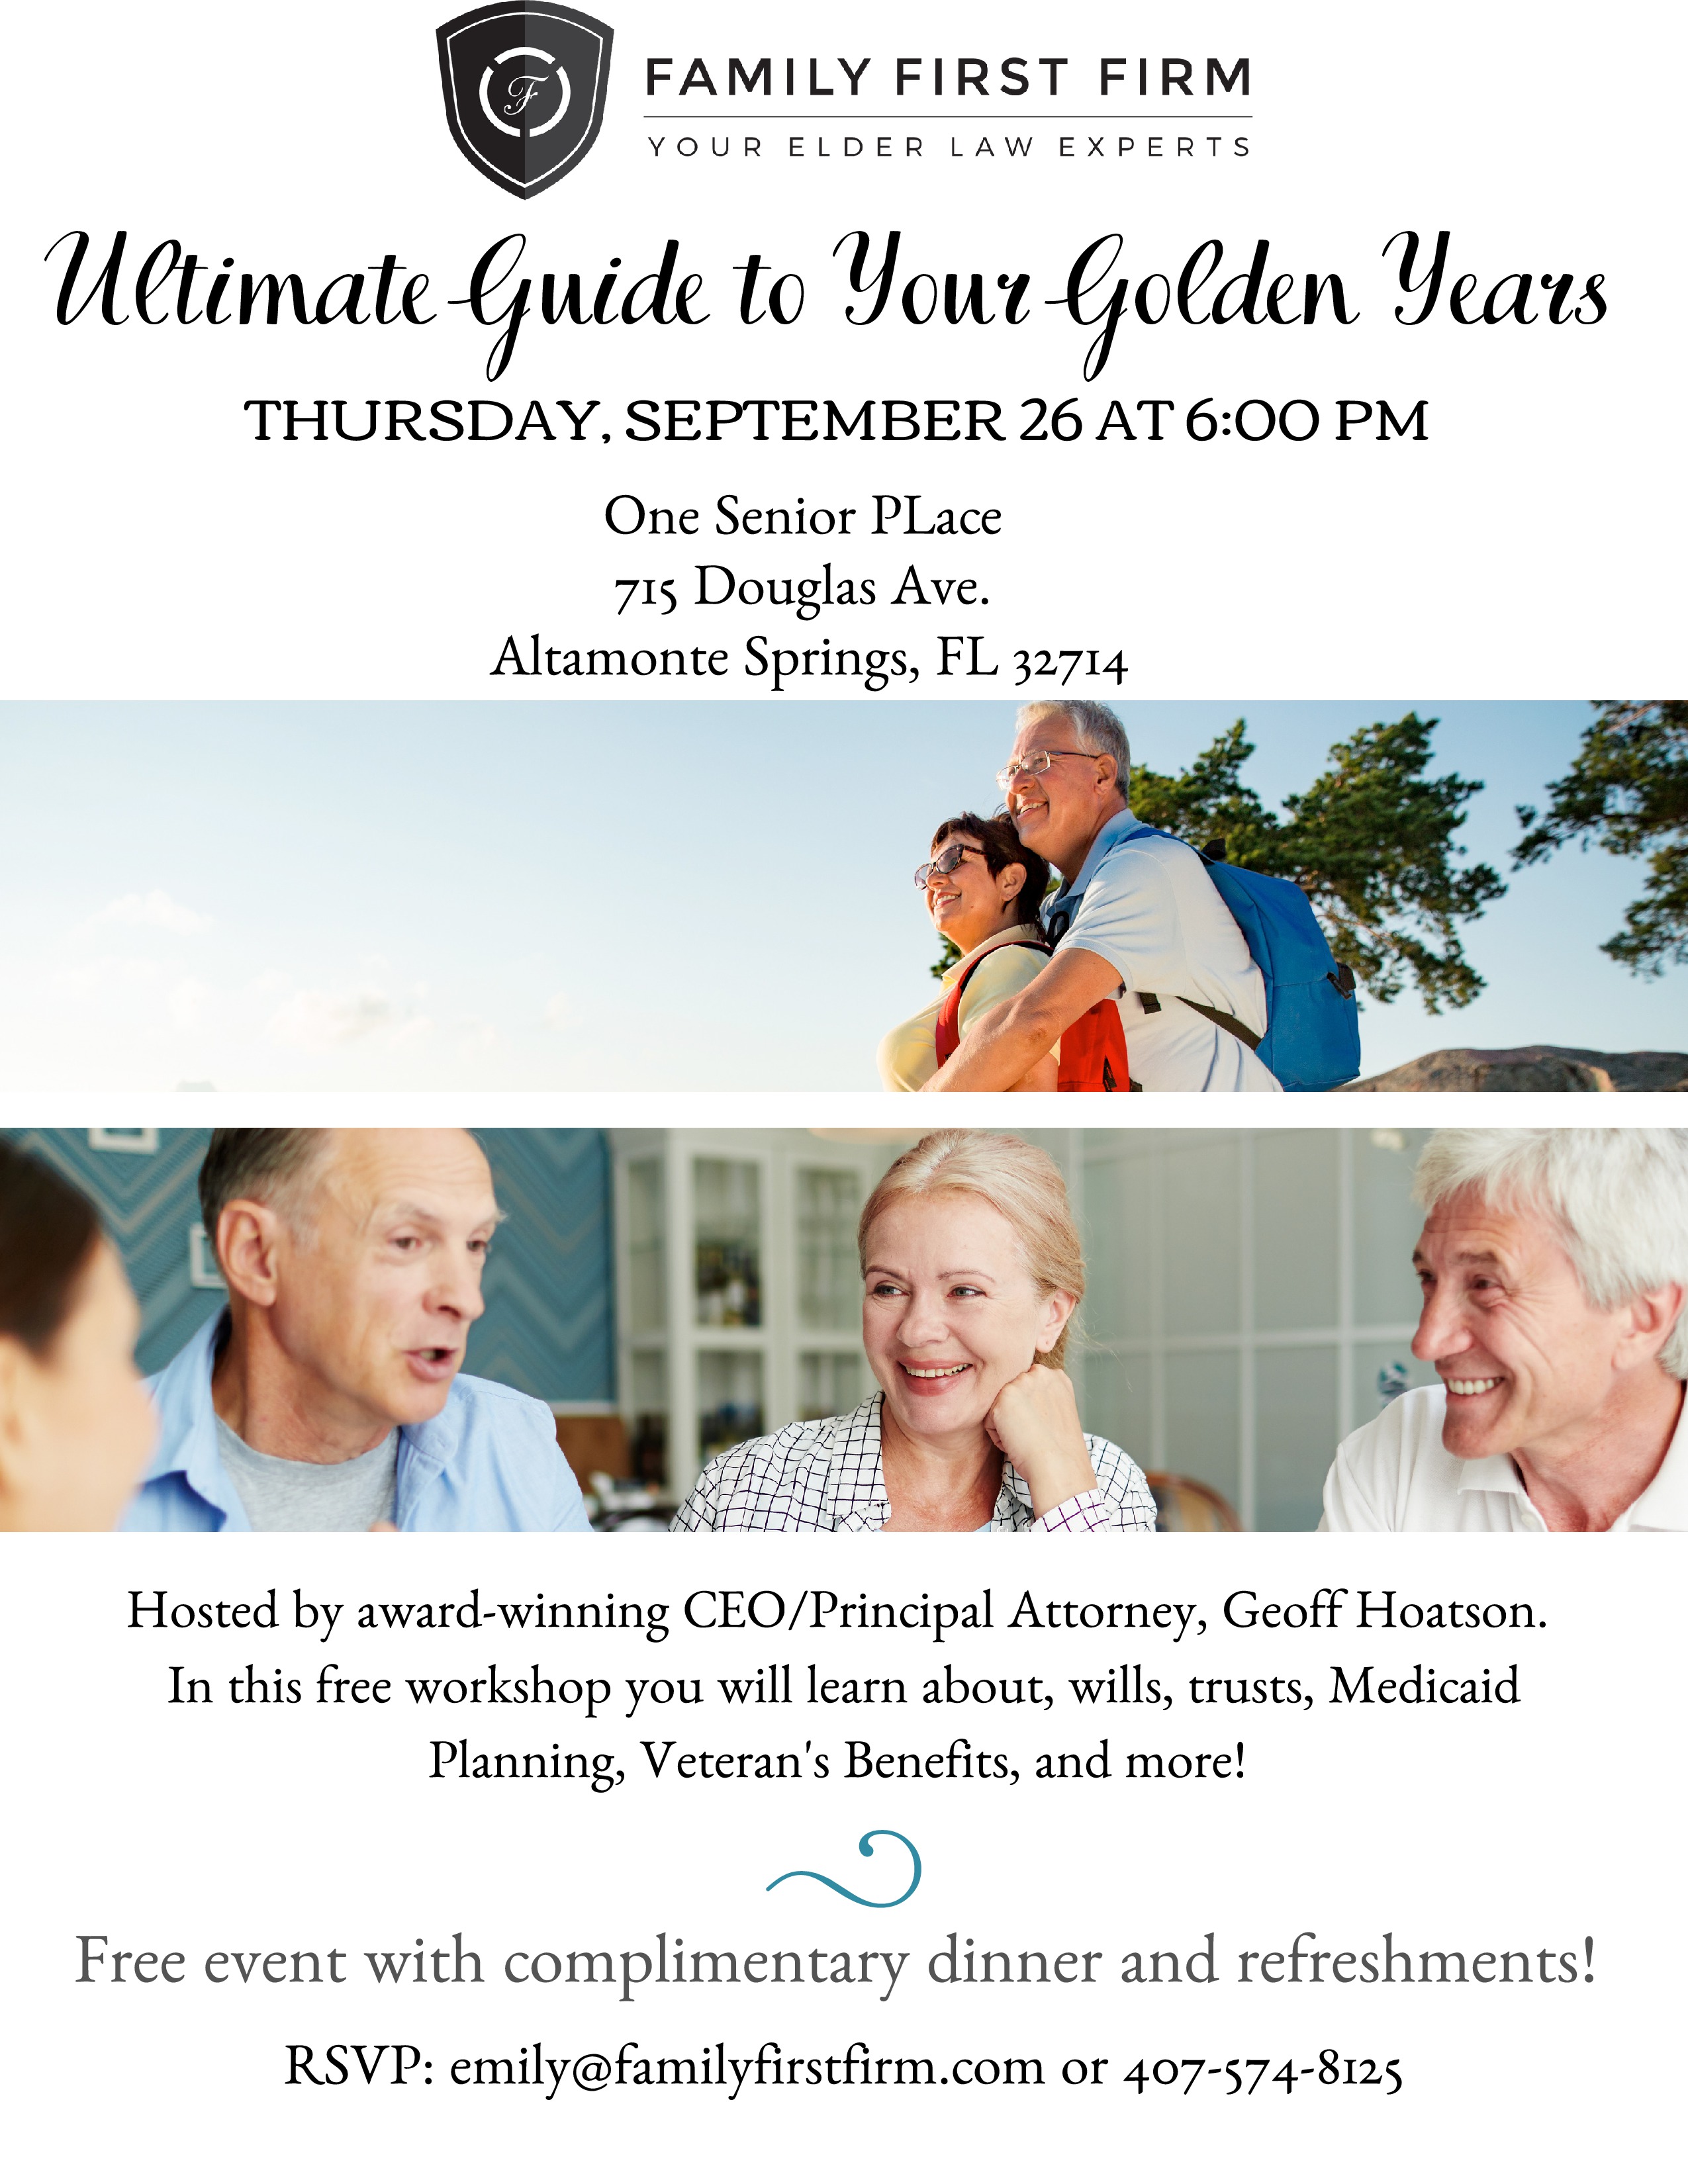 The Ultimate Guide to Your Golden Years